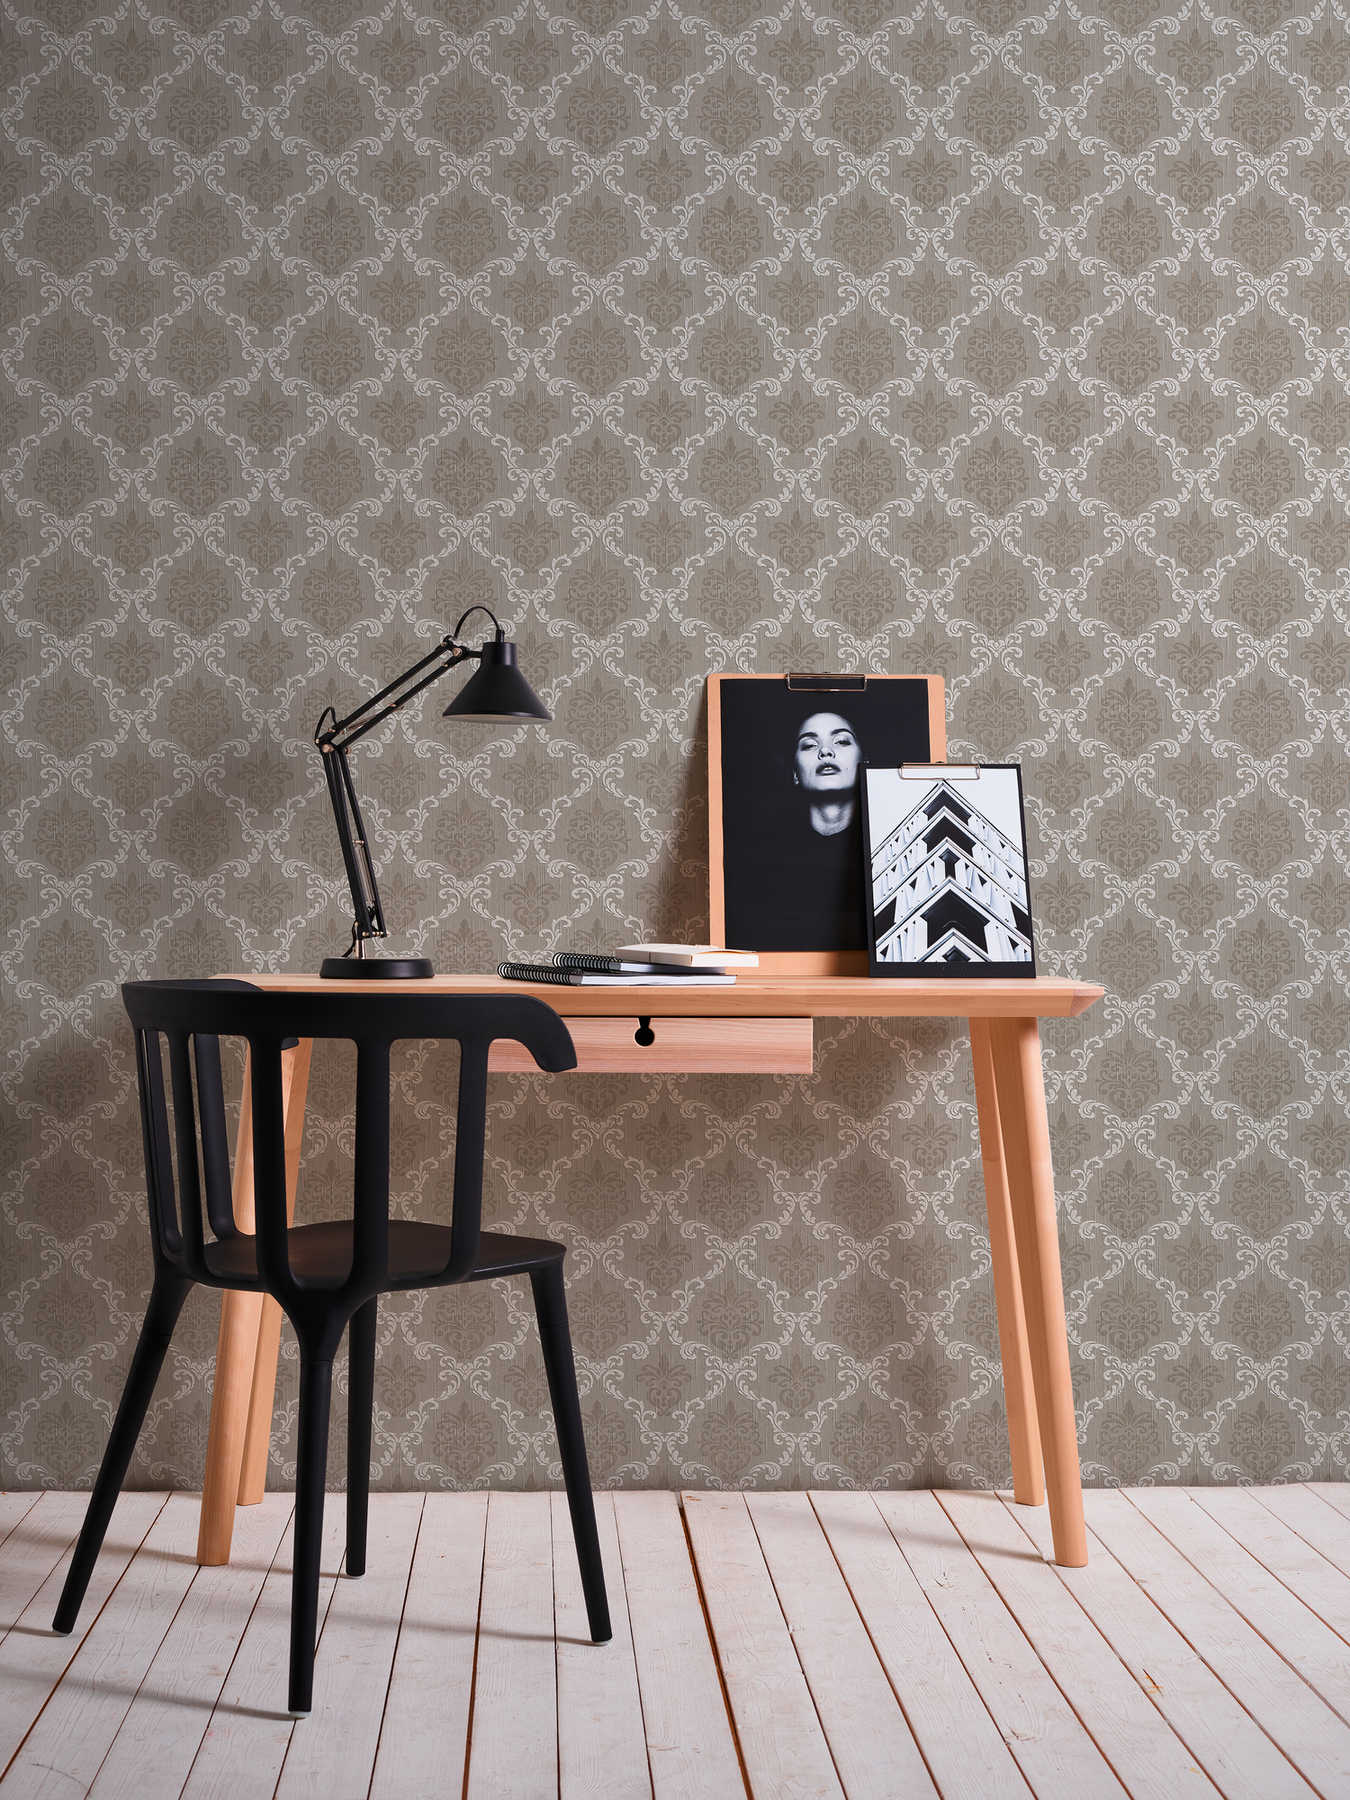             Non-woven wallpaper with ornament design in colonial style - beige, grey
        